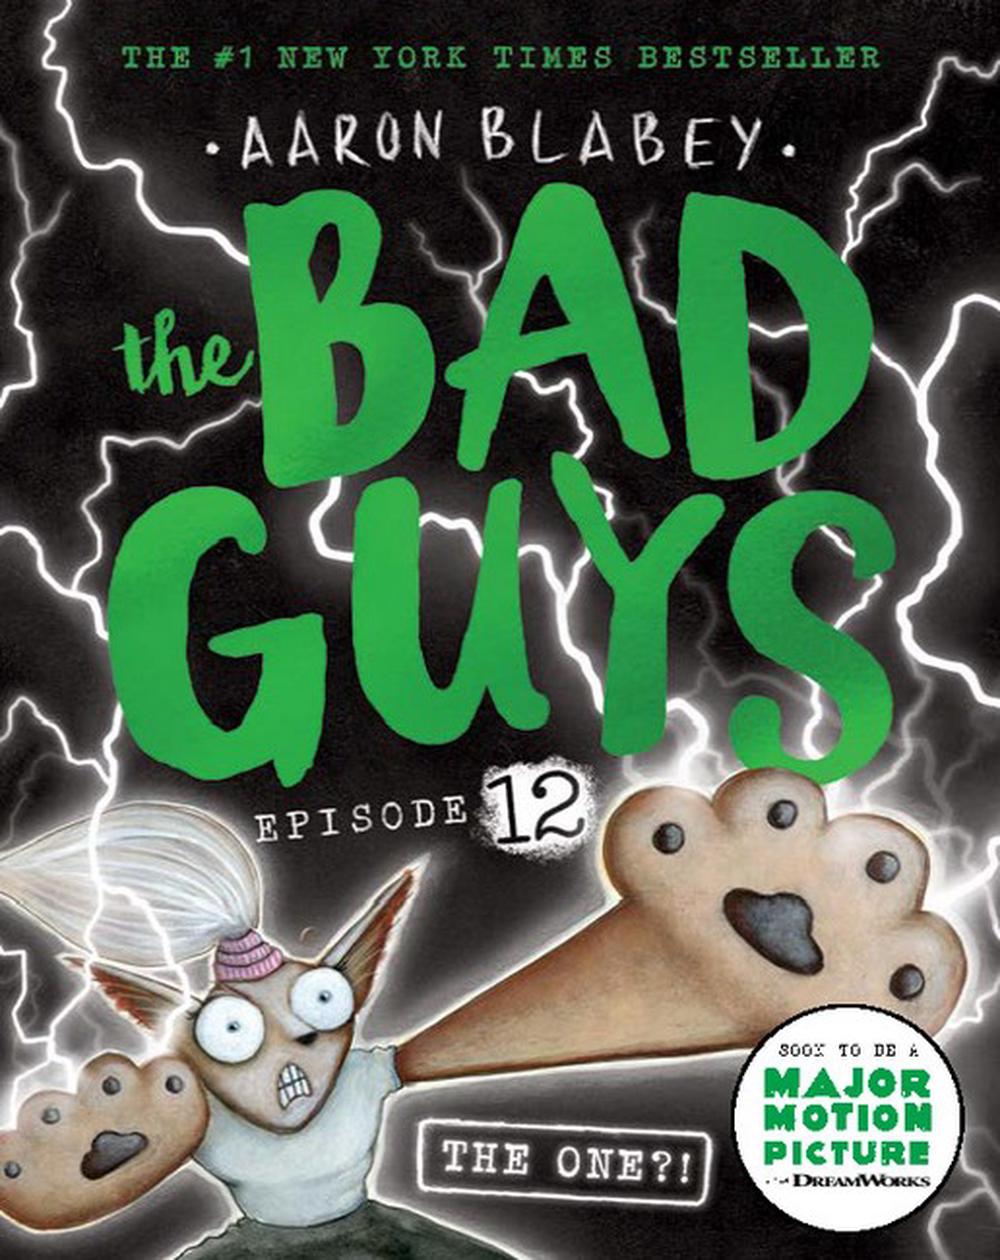 the bad guys book 2022